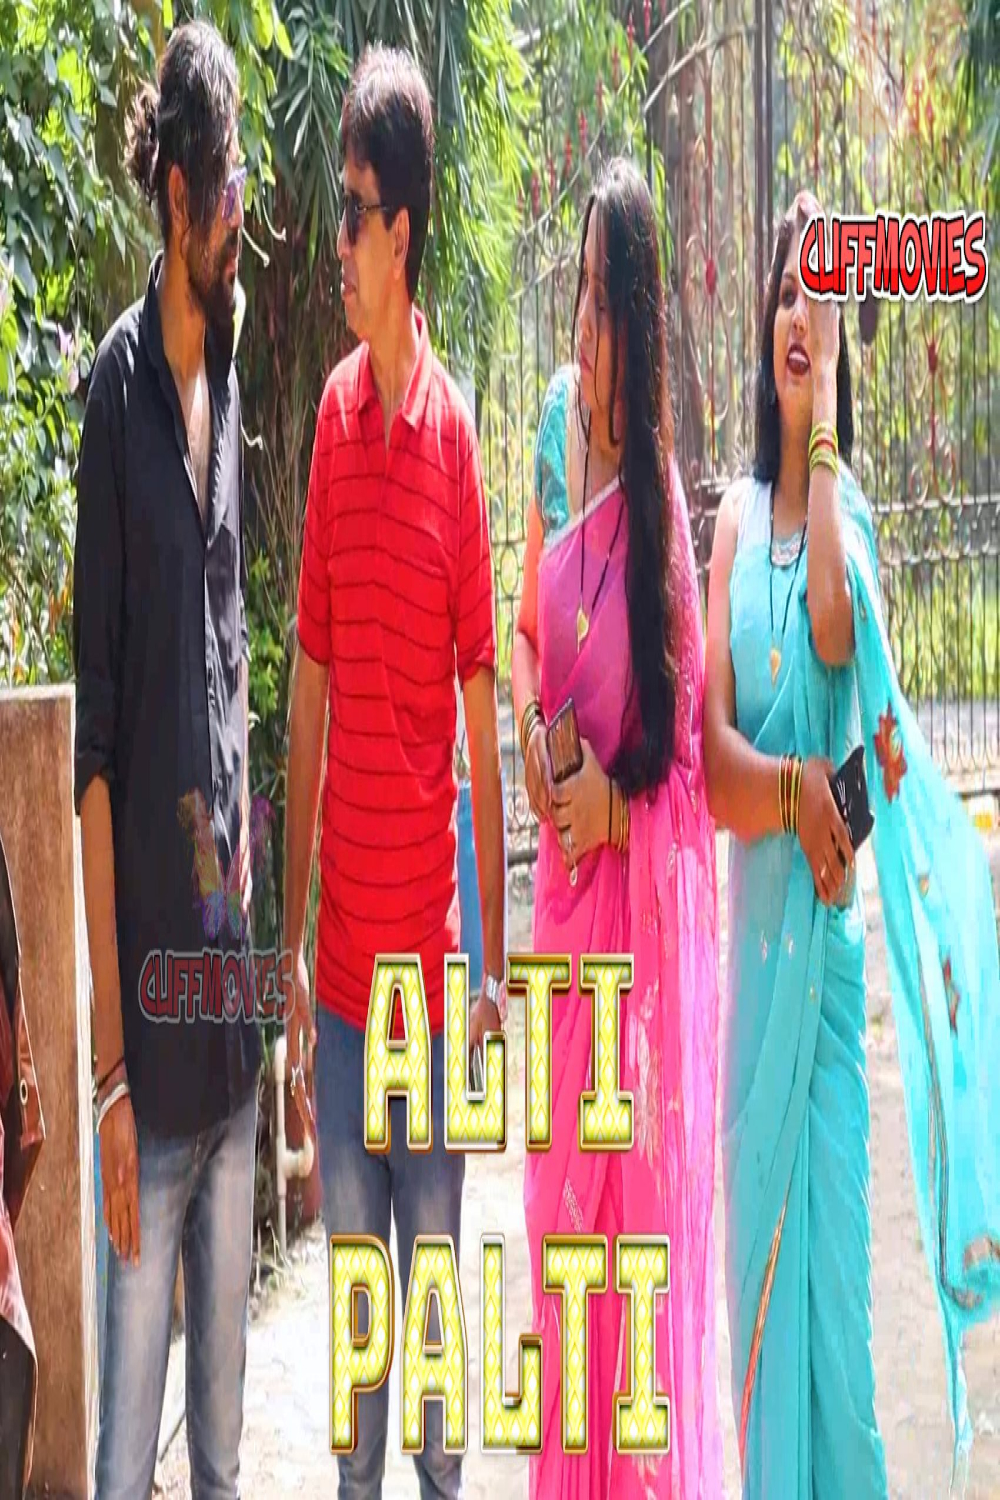 You are currently viewing Alti Palti 2020 Hindi S01E05 Hot Web Series 720p HDRip 150MB Download & Watch Online